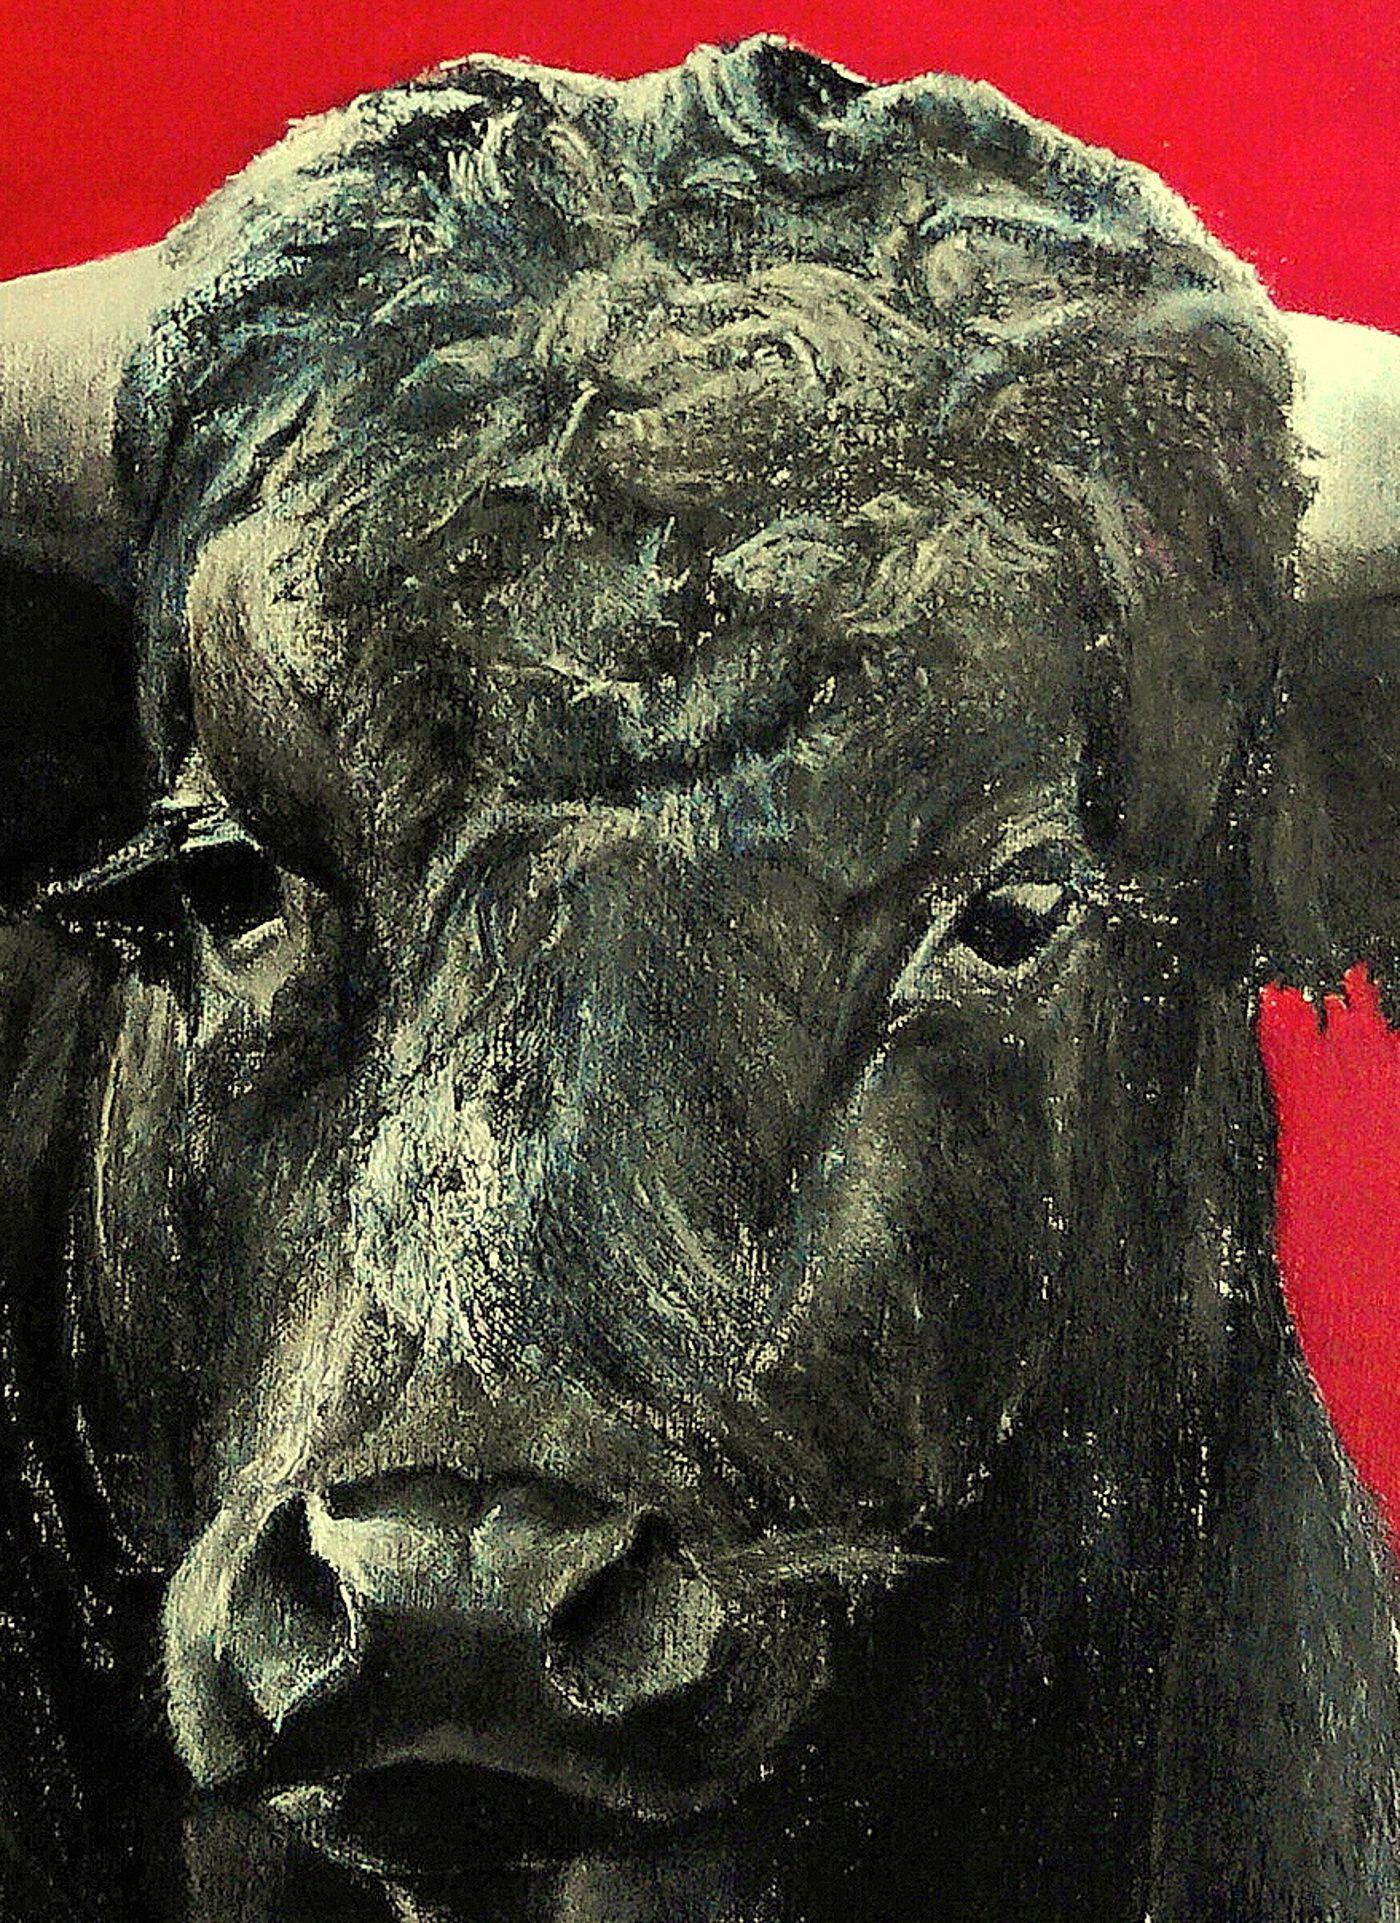 Brave bull  on red color, Painting, Oil on Canvas 1